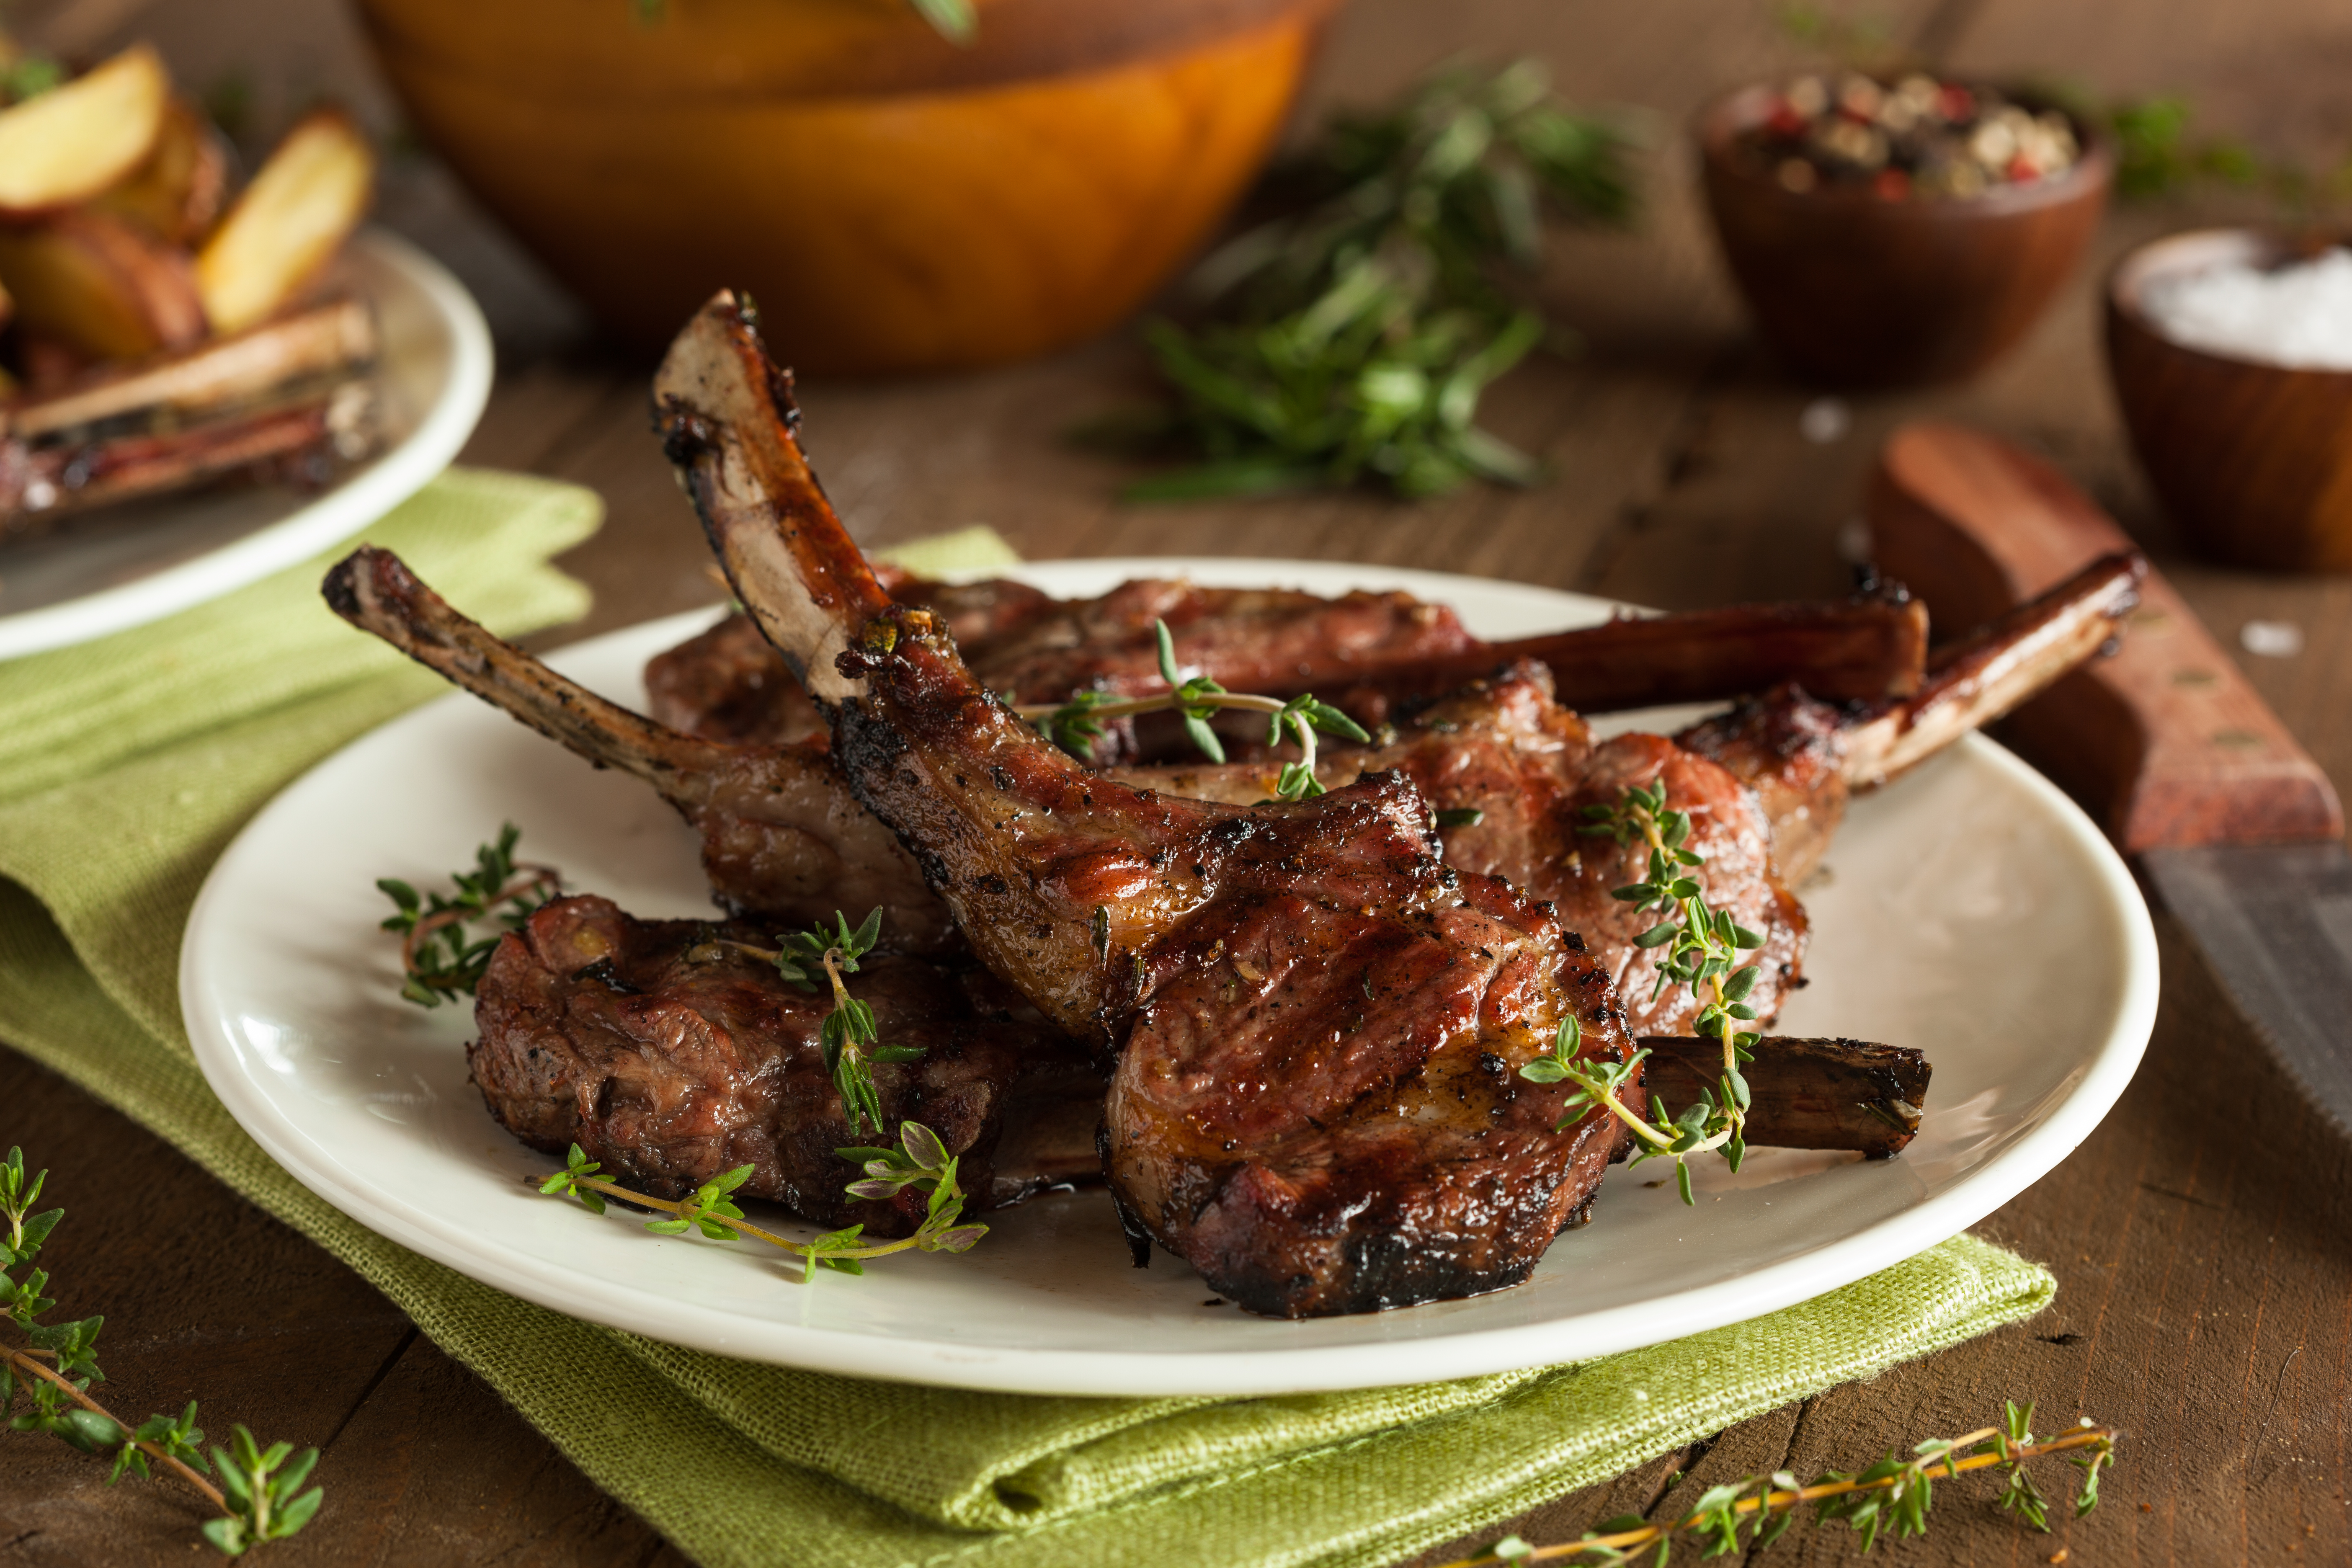 10 herbs seasoning that go well with lamb